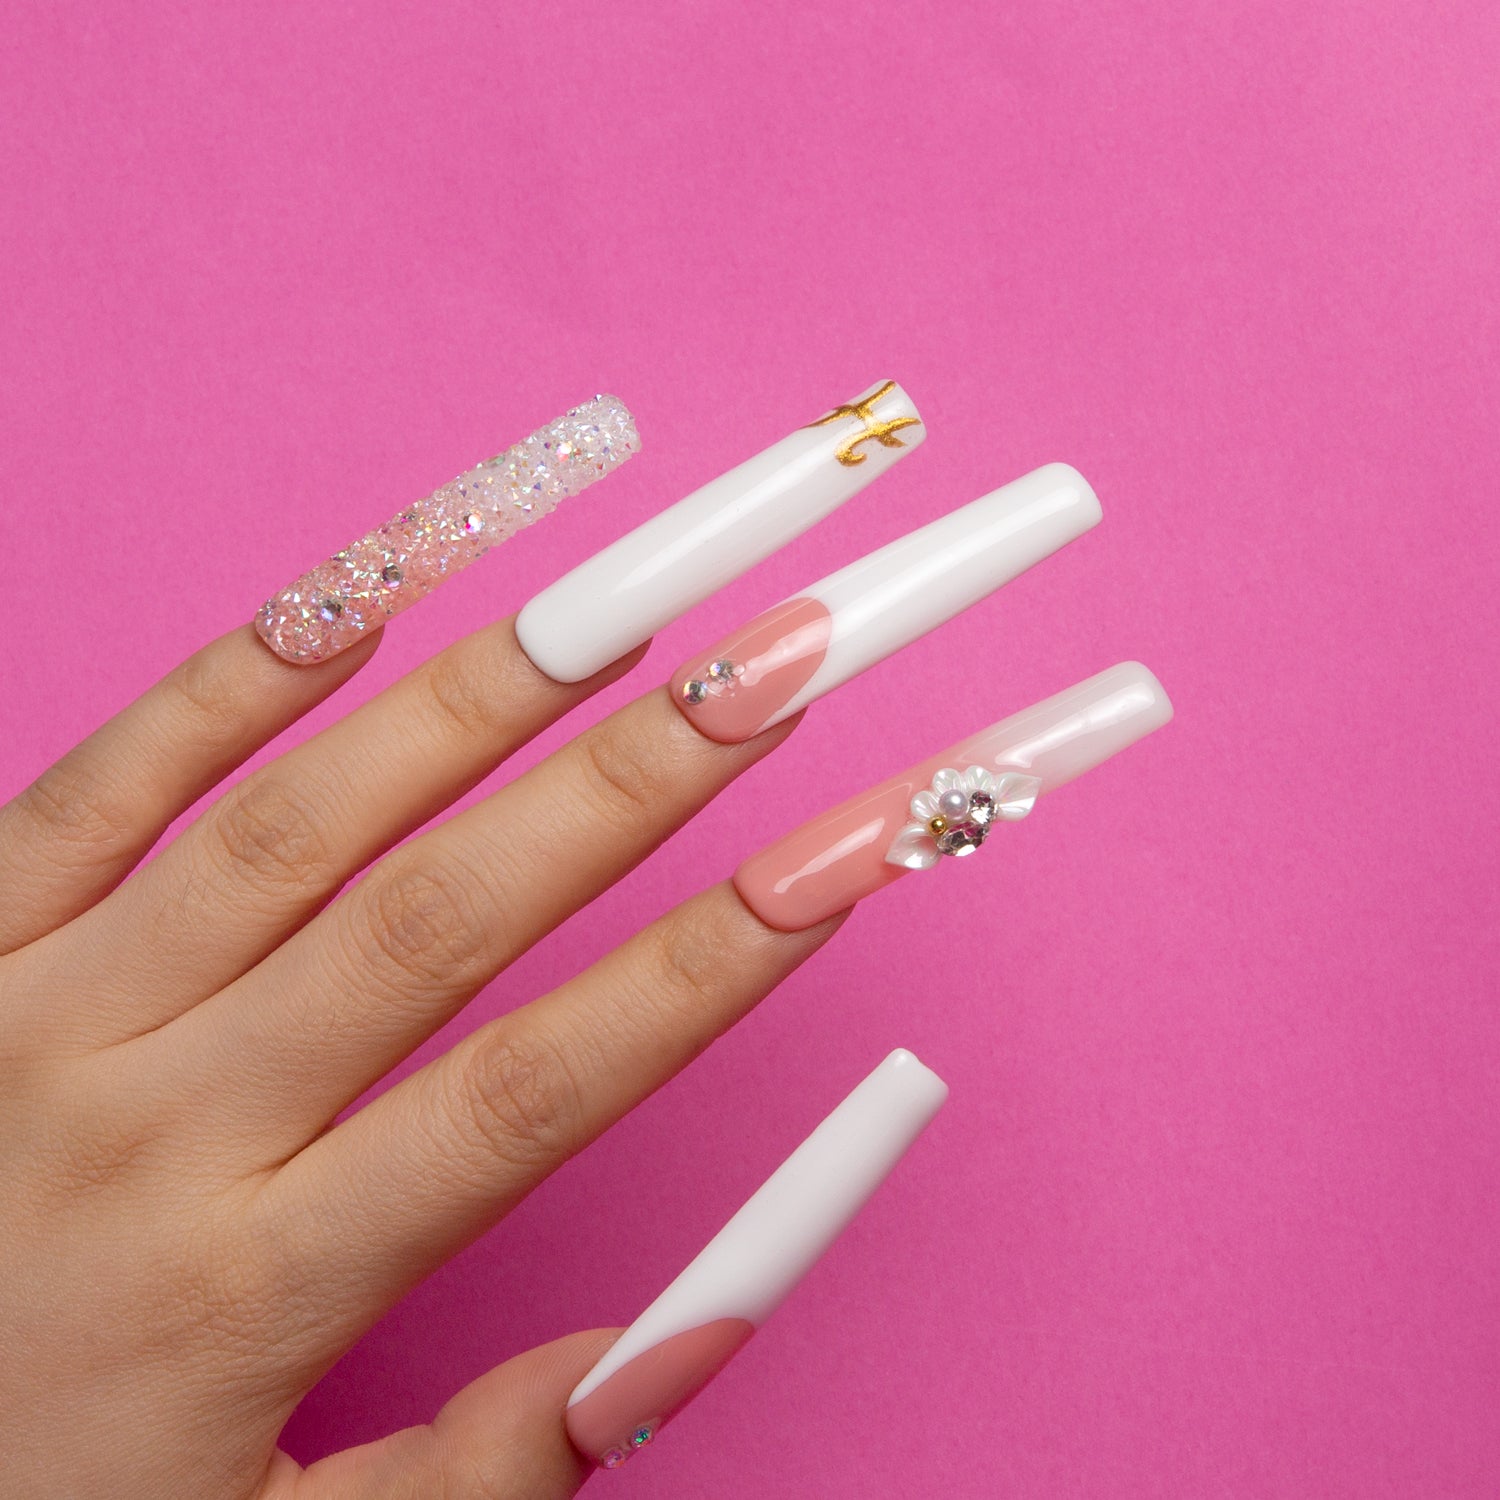 Only You French tip Square nails H97